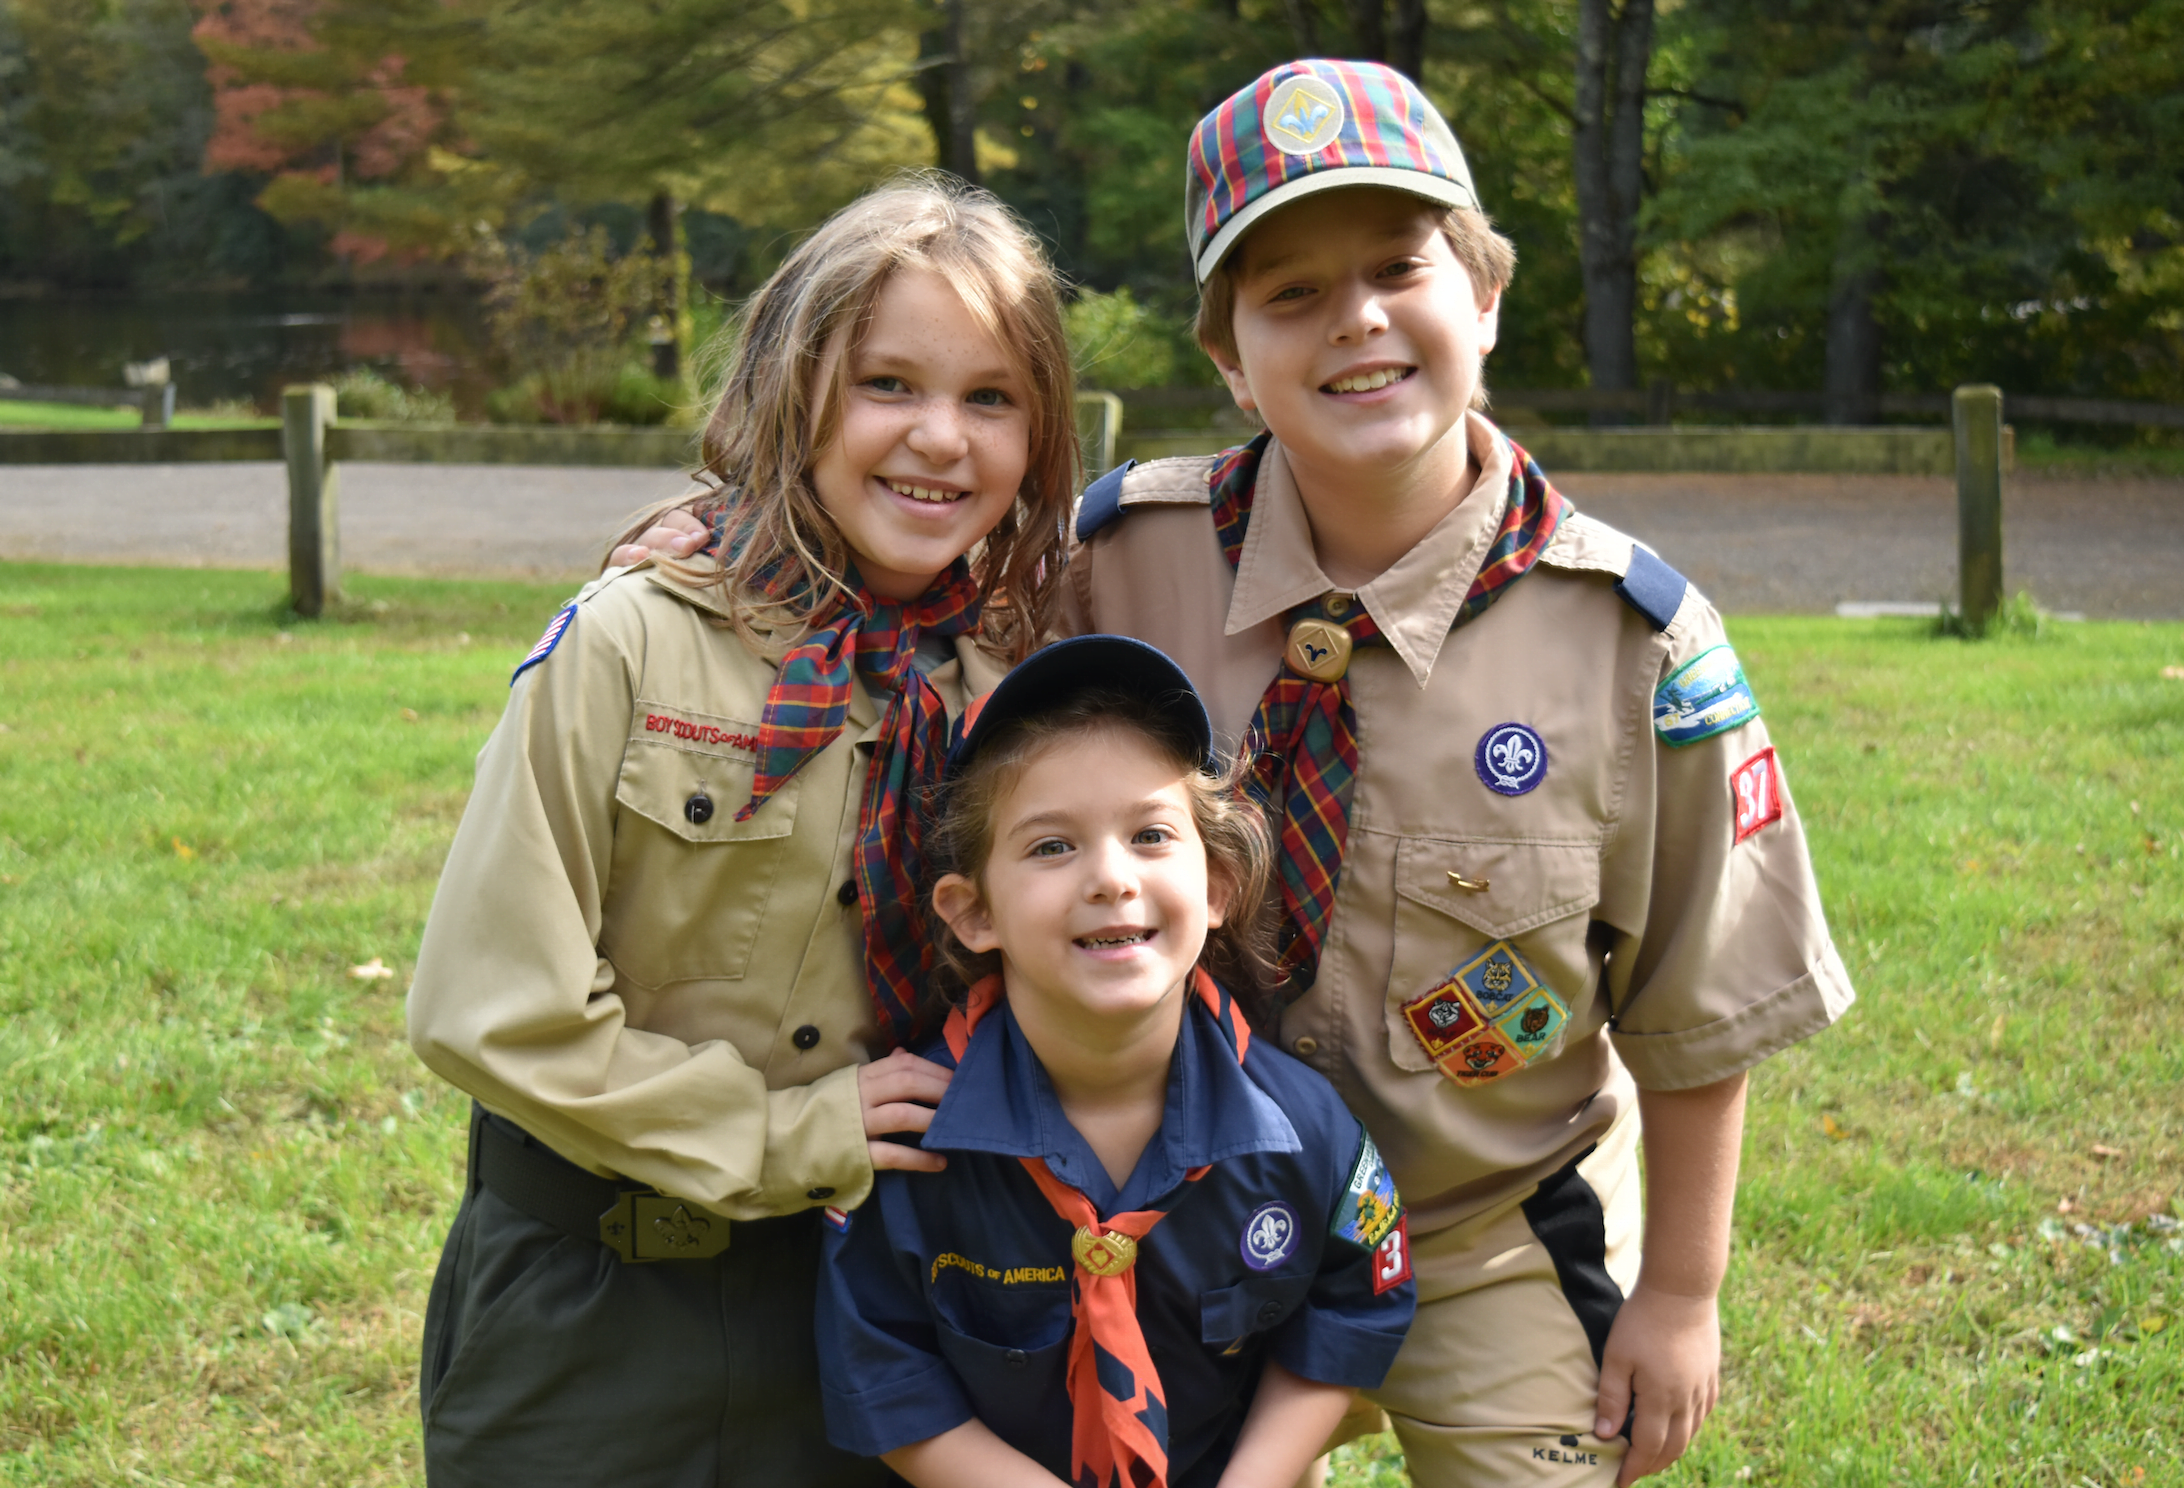 Cub Scouts Mattie and Jamie Leader with their cousin Caroline Zisson at Greenwich Scouting's Fall Festival at Seton Scout Reservation.